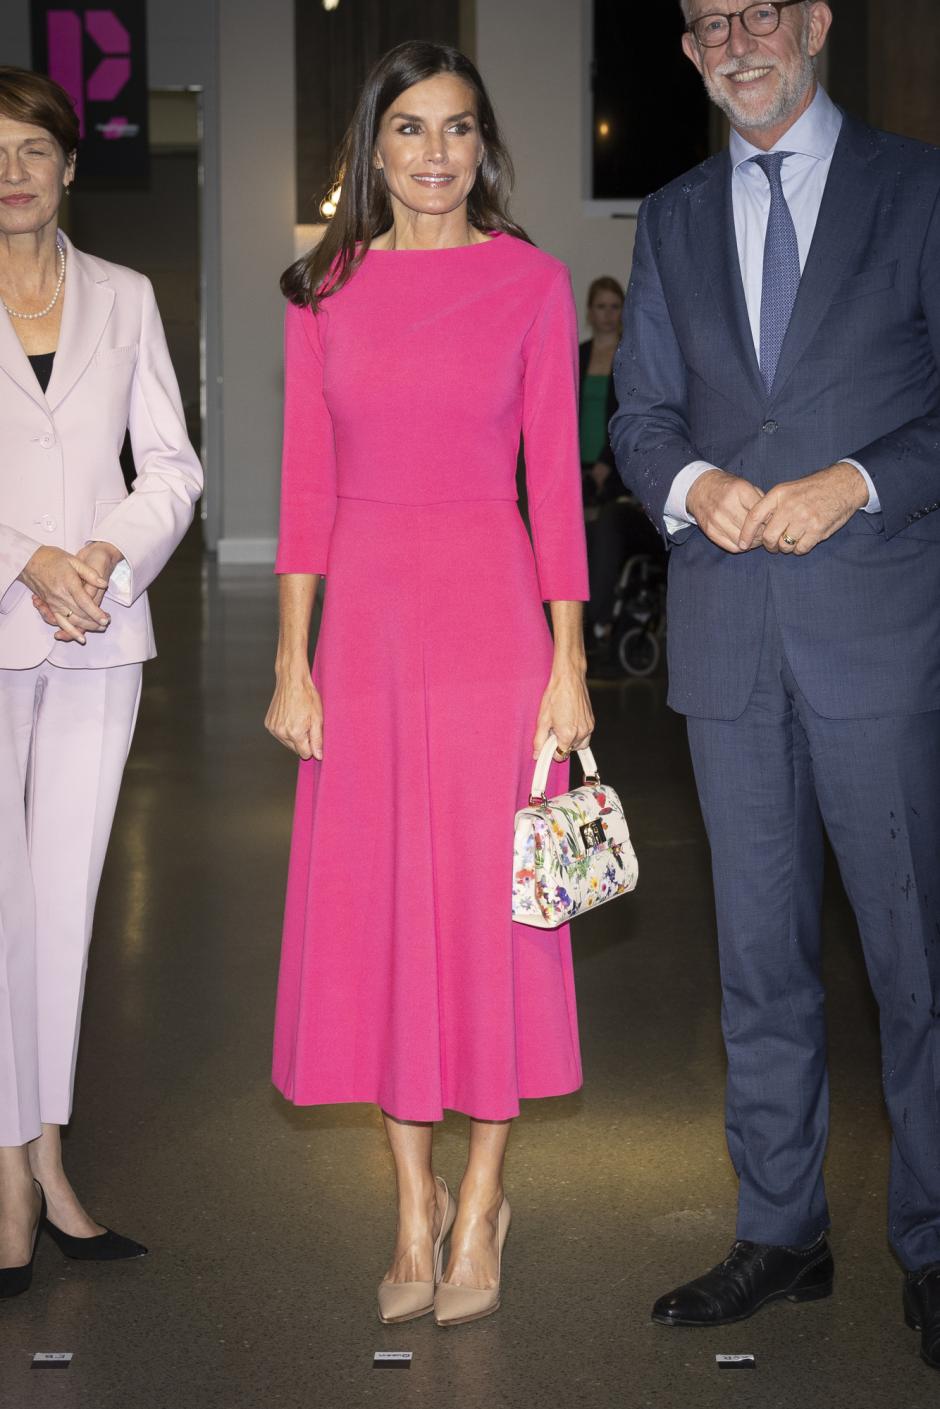 Spanish Queen Letizia with Elke Büdenbender during a visit to Escribir todos sus nombres exhibition at HelgaAtAlvearMuseum on ocassion the official visit to Germany in Berlin on Tuesday 18 October 2022.